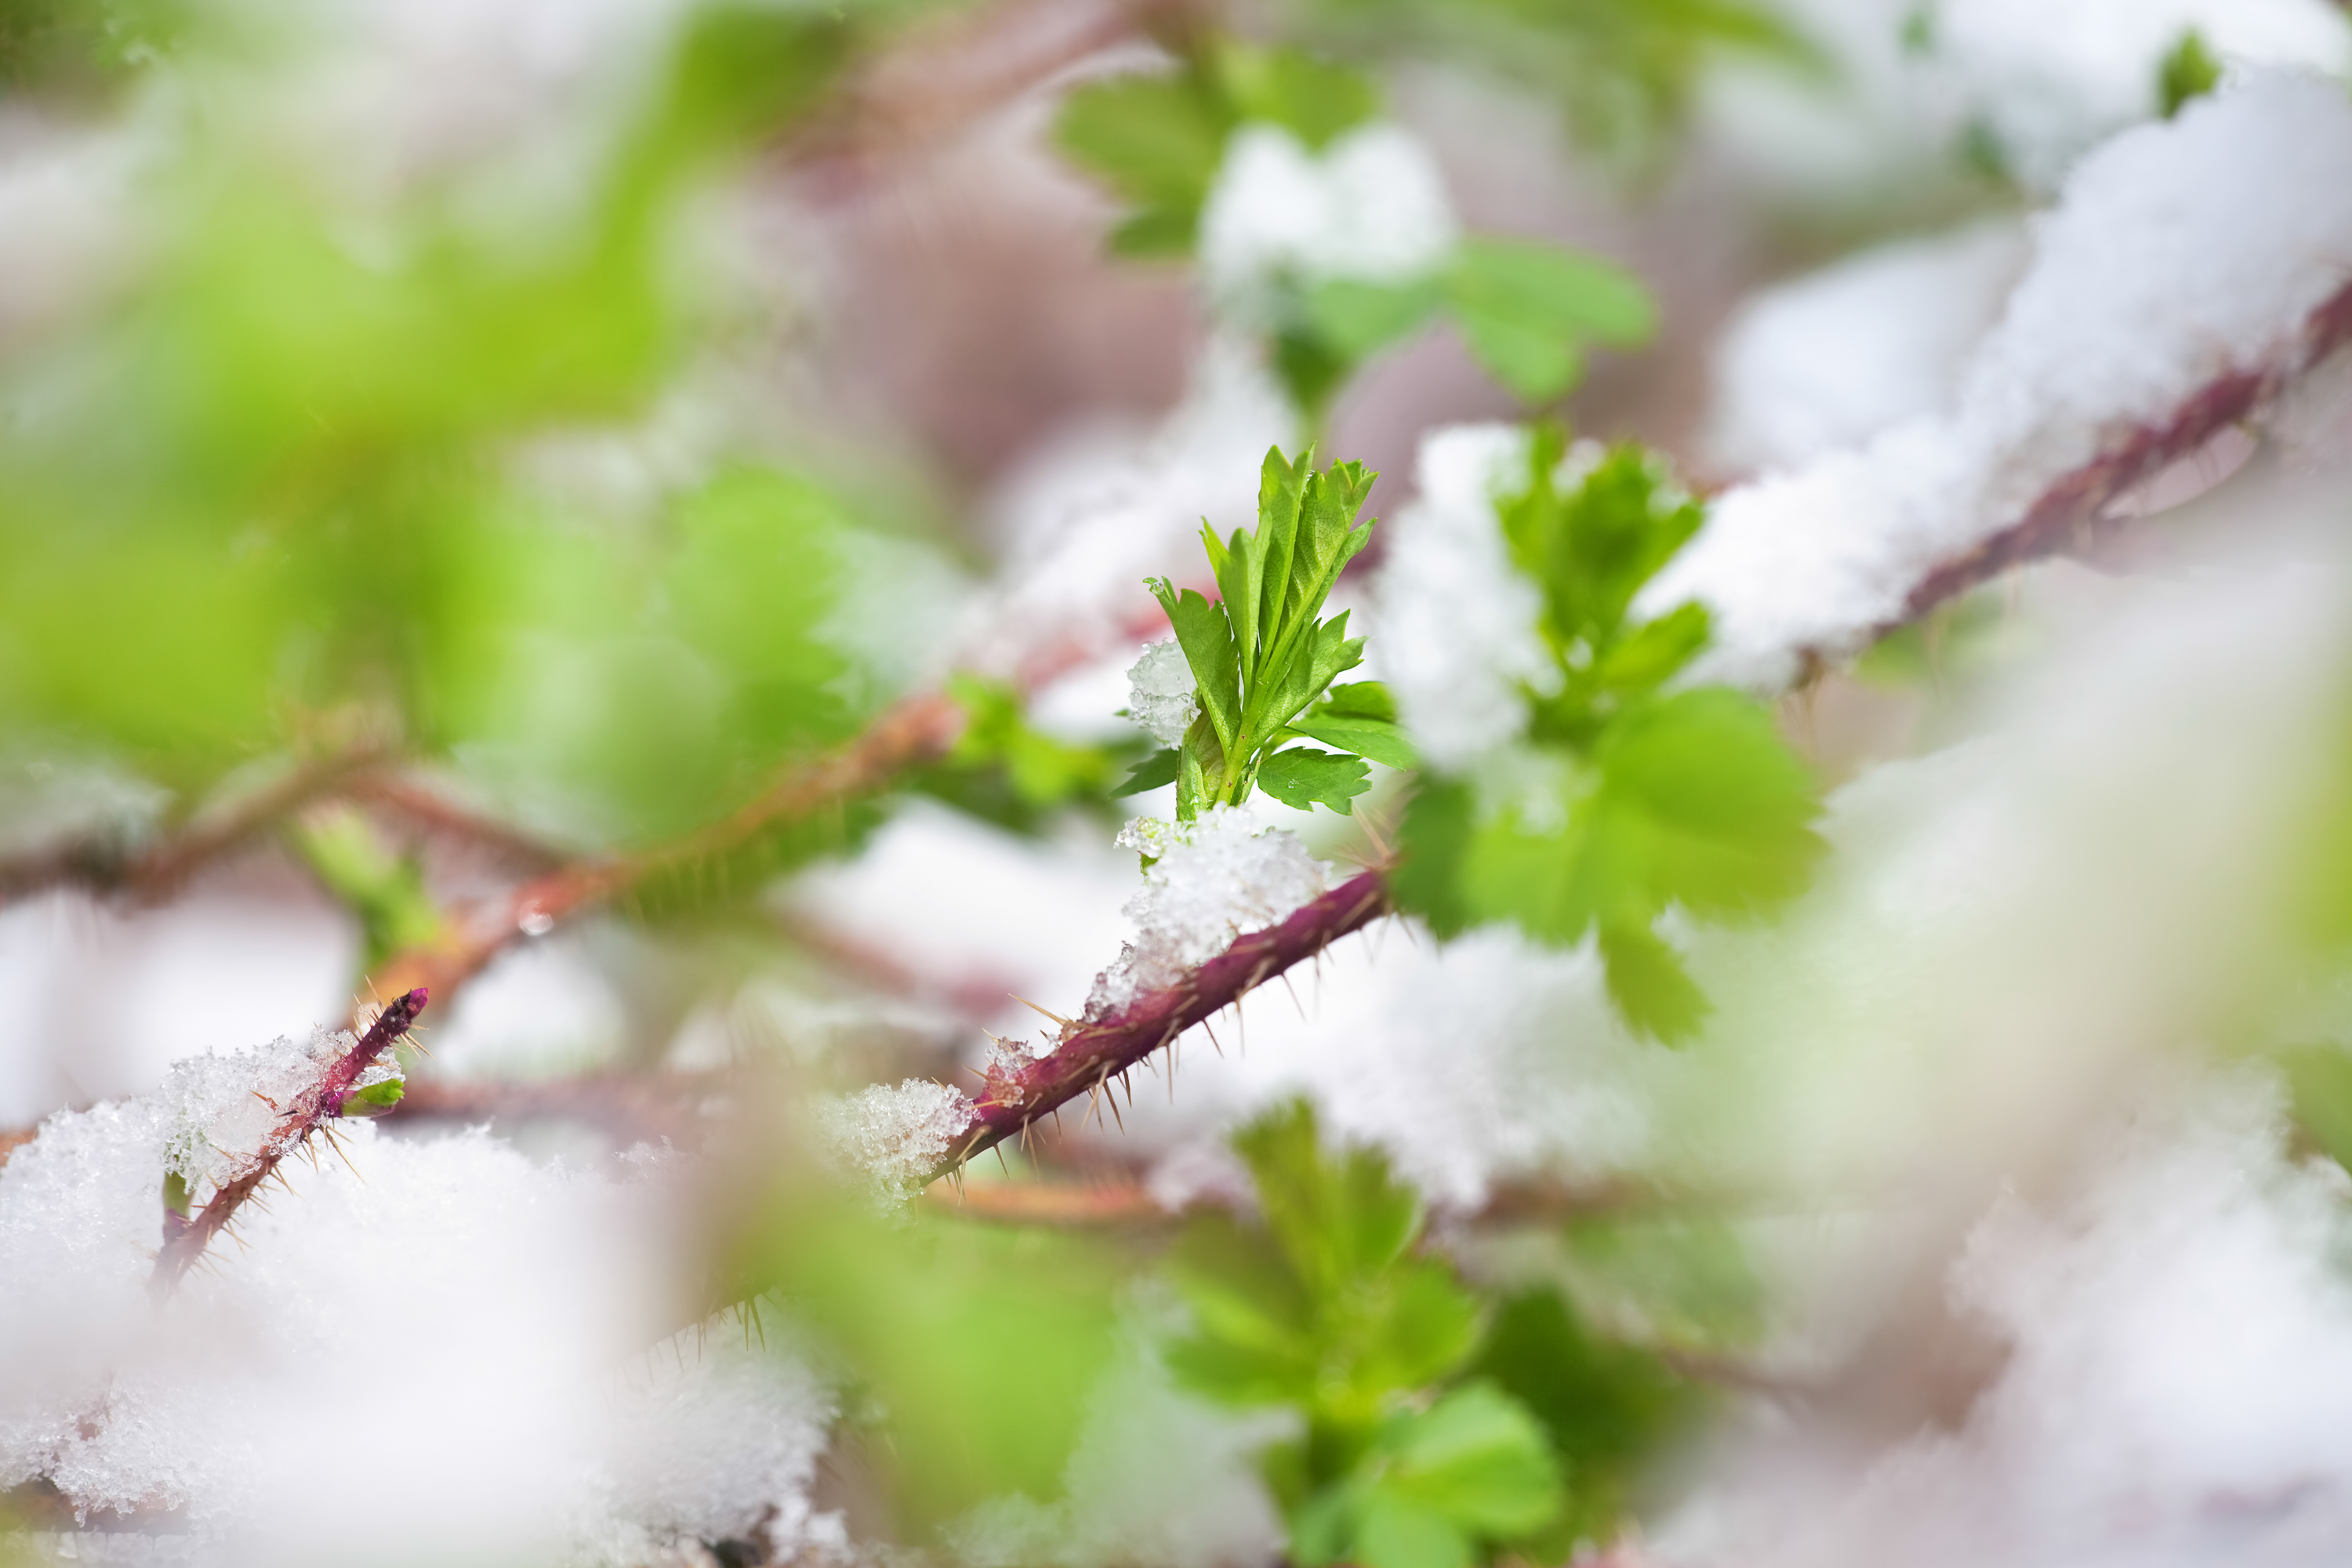 Grass in the snow photo